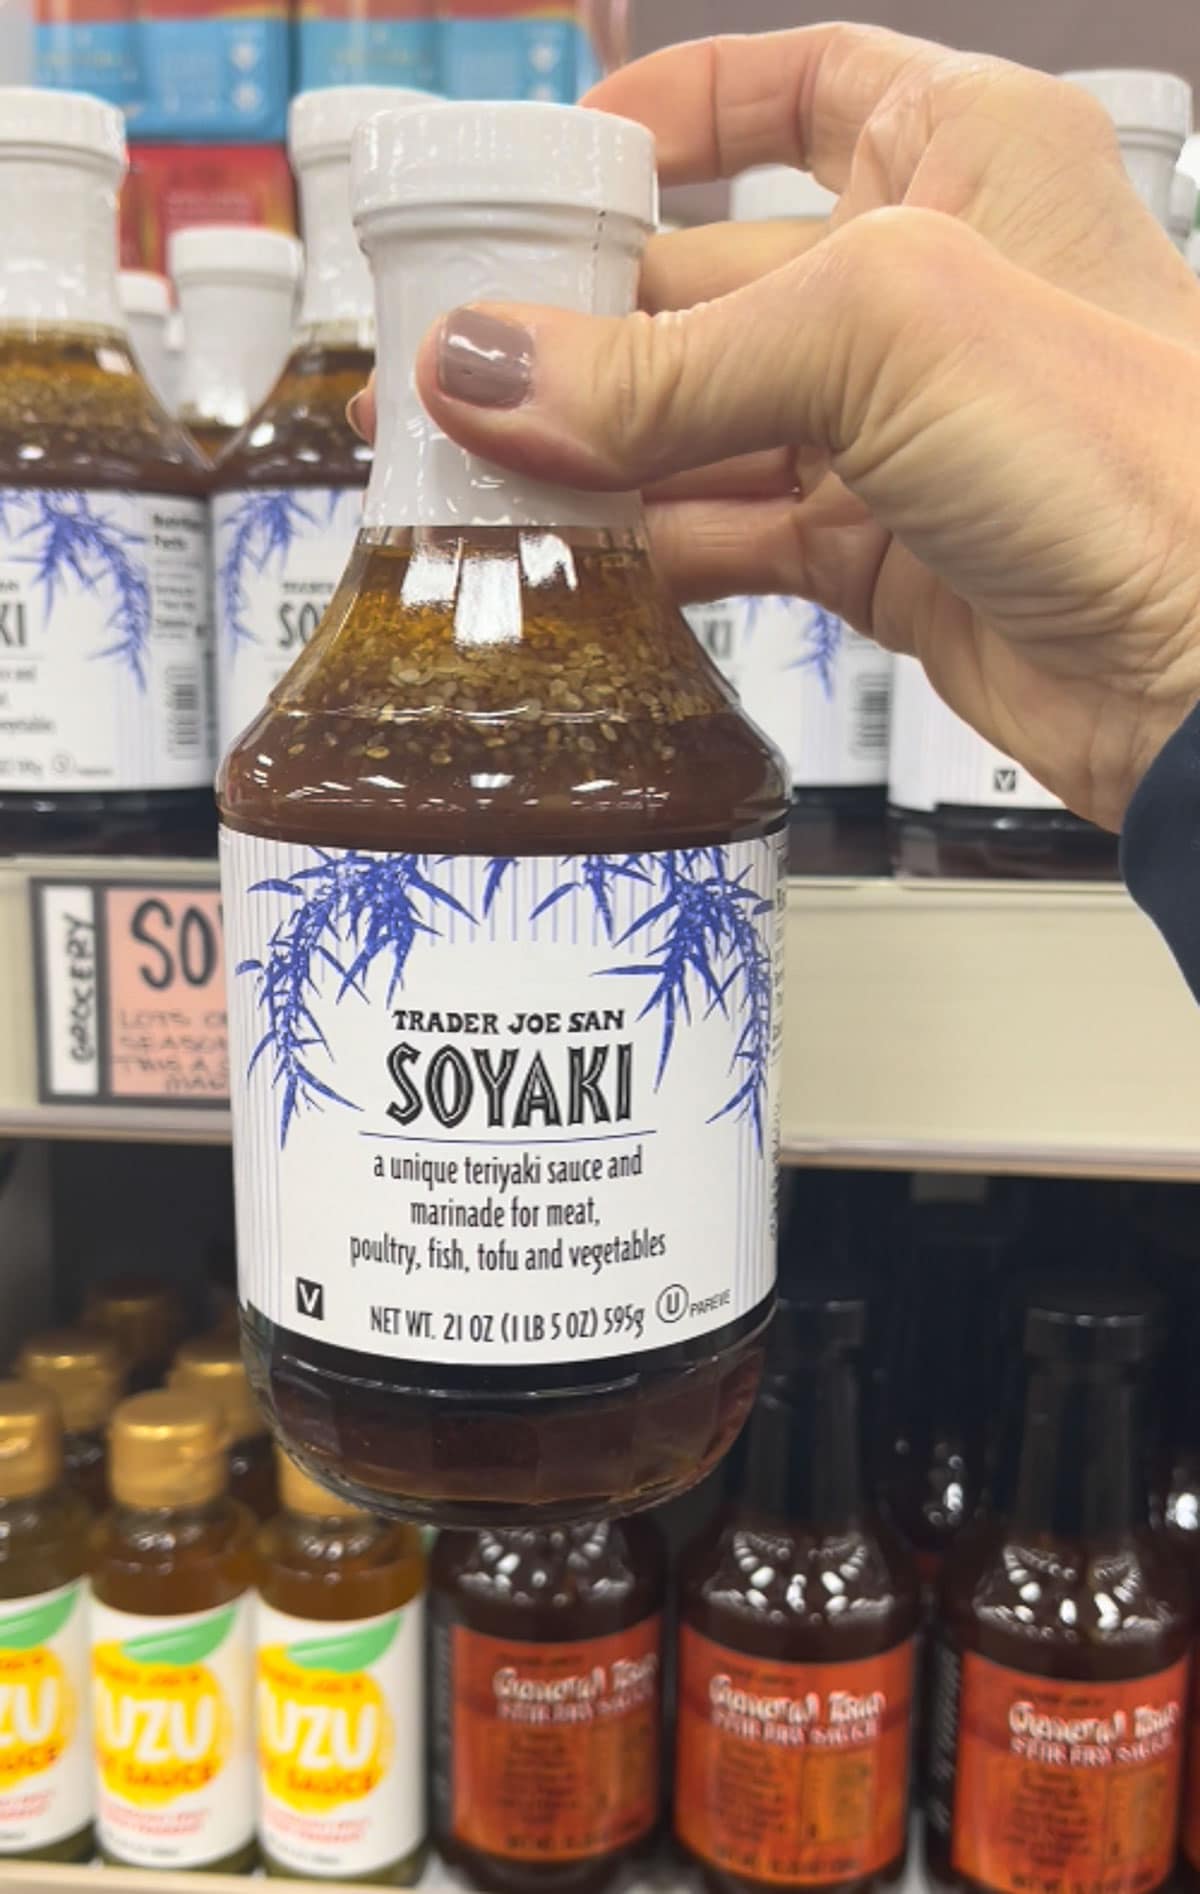 A hand holding up a bottle of Trader Joe's Soyaki teriyaki sauce with various bottles on shelves in the background.